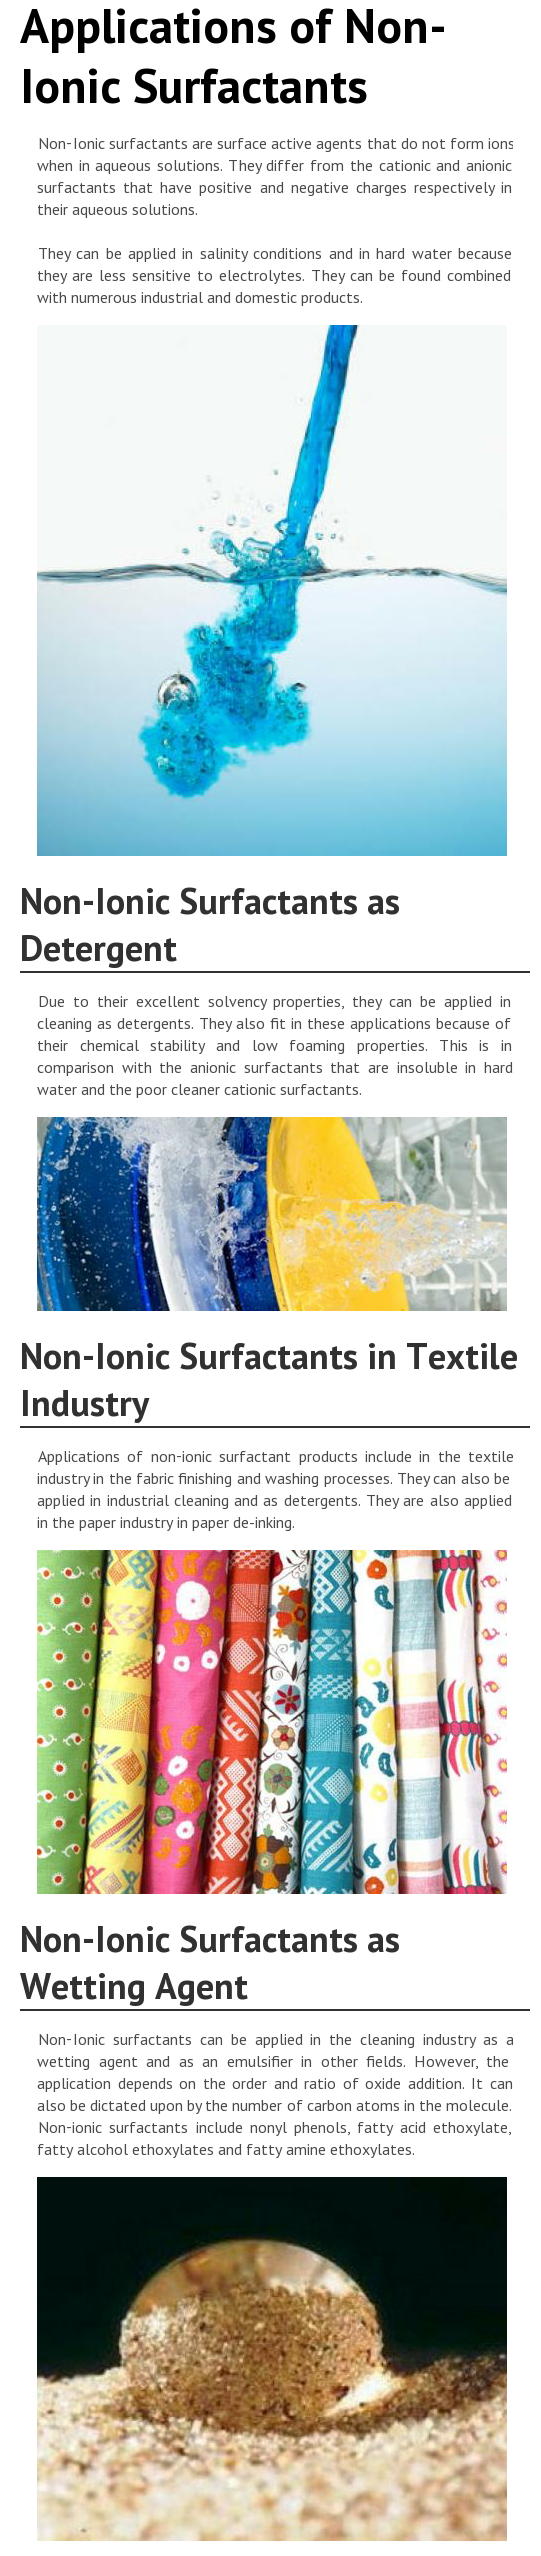 Non-Ionic Surface Active Agents & Their Industrial Applications [INFOGRAPH]